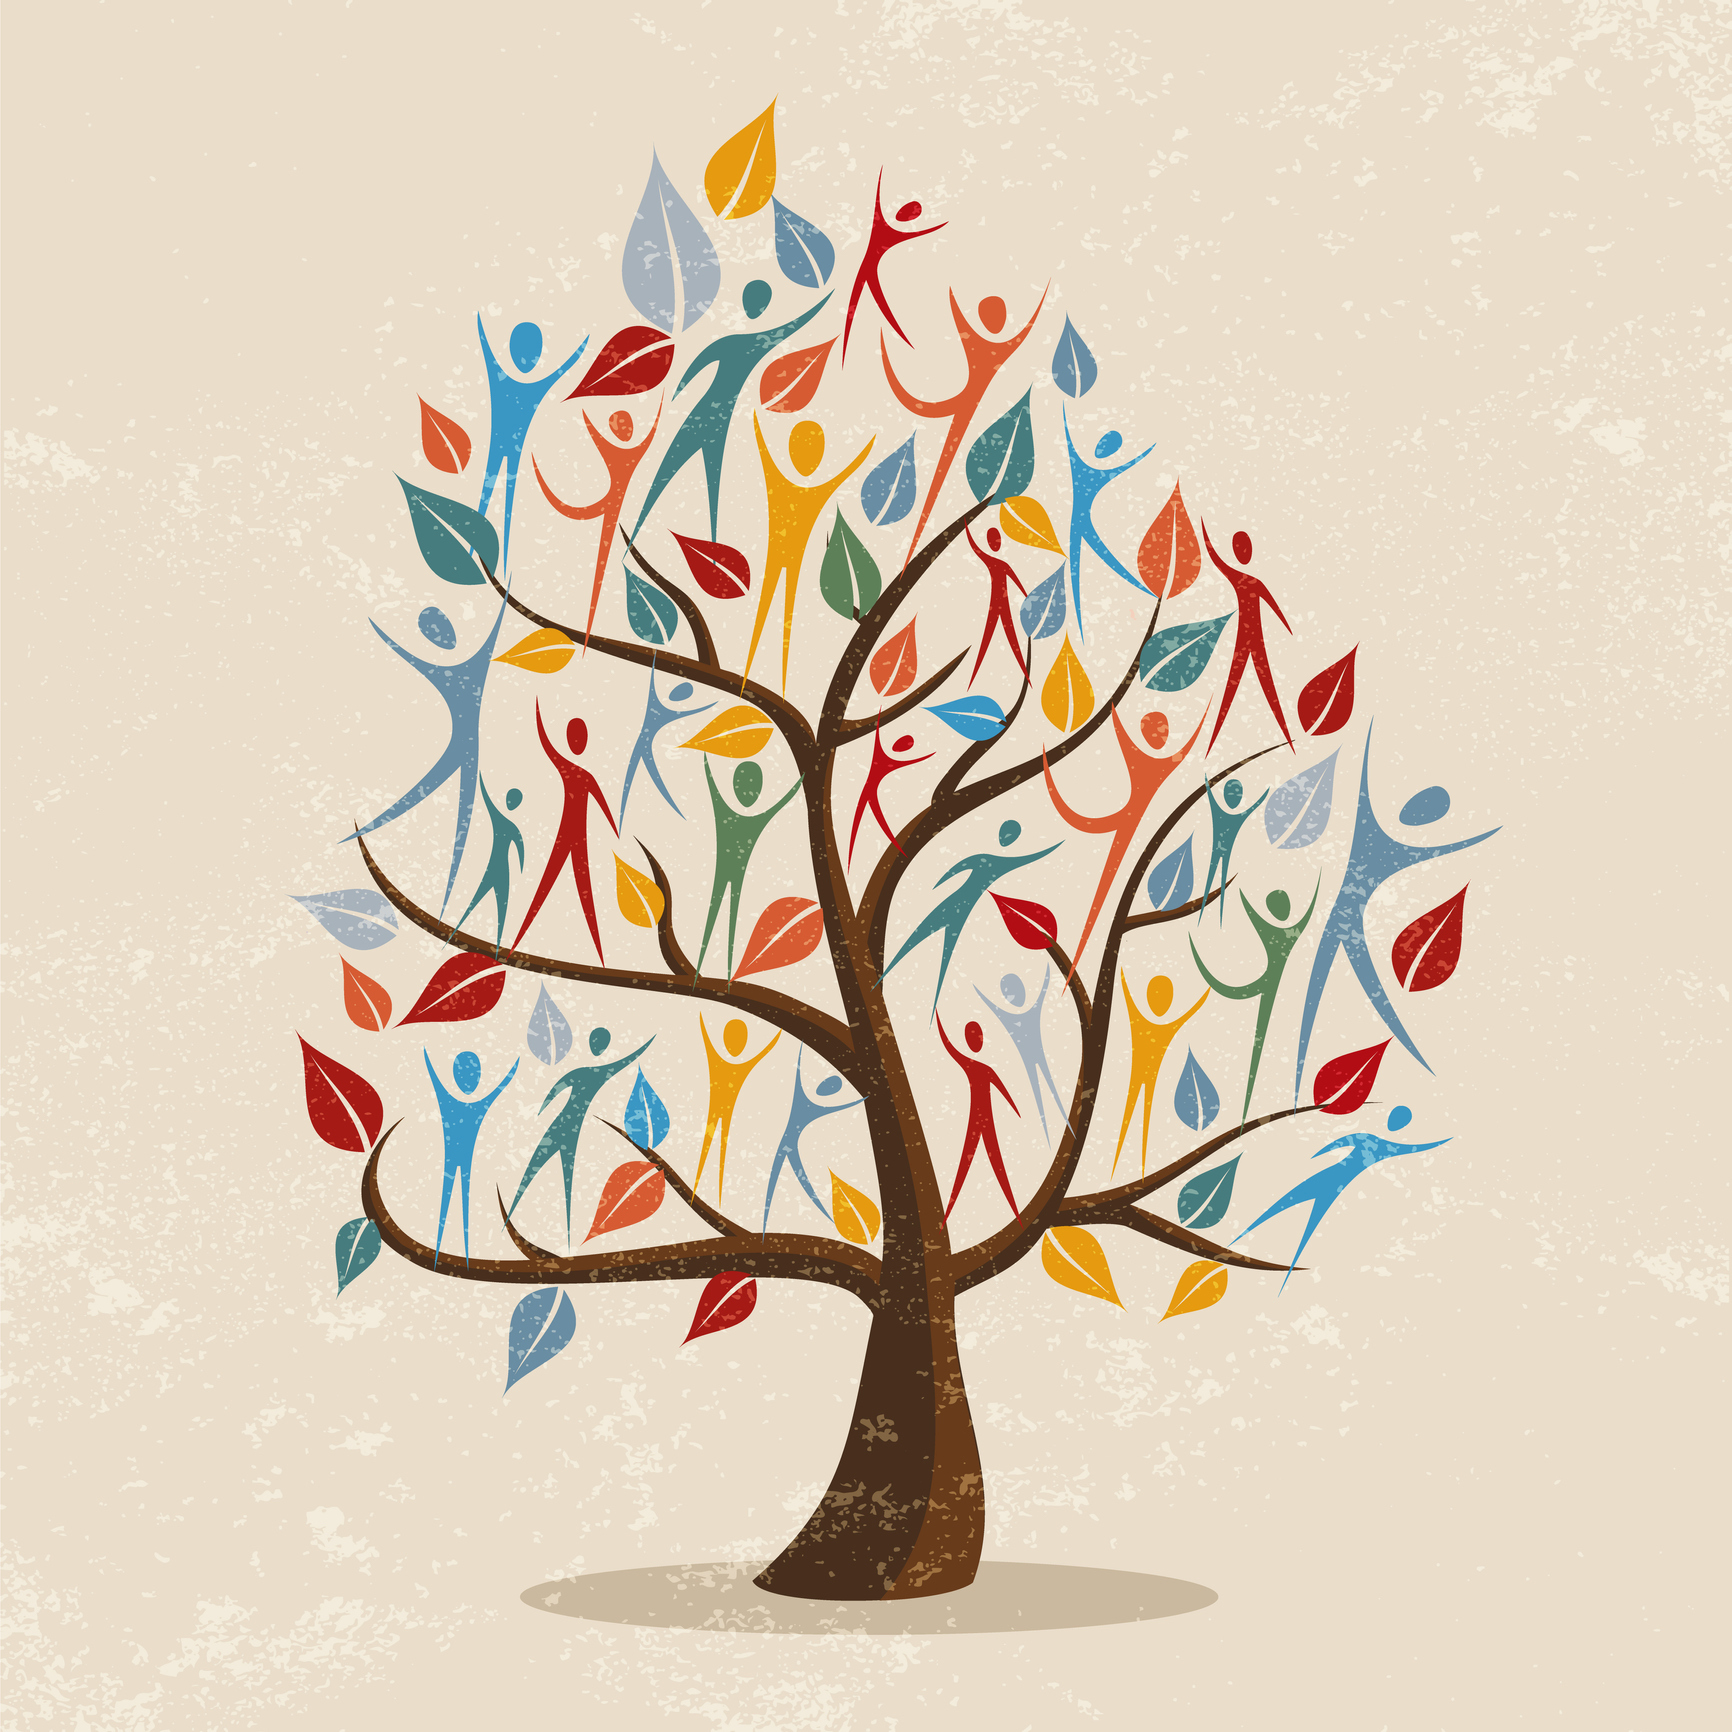 Illustration of family tree symbol with colorful people.